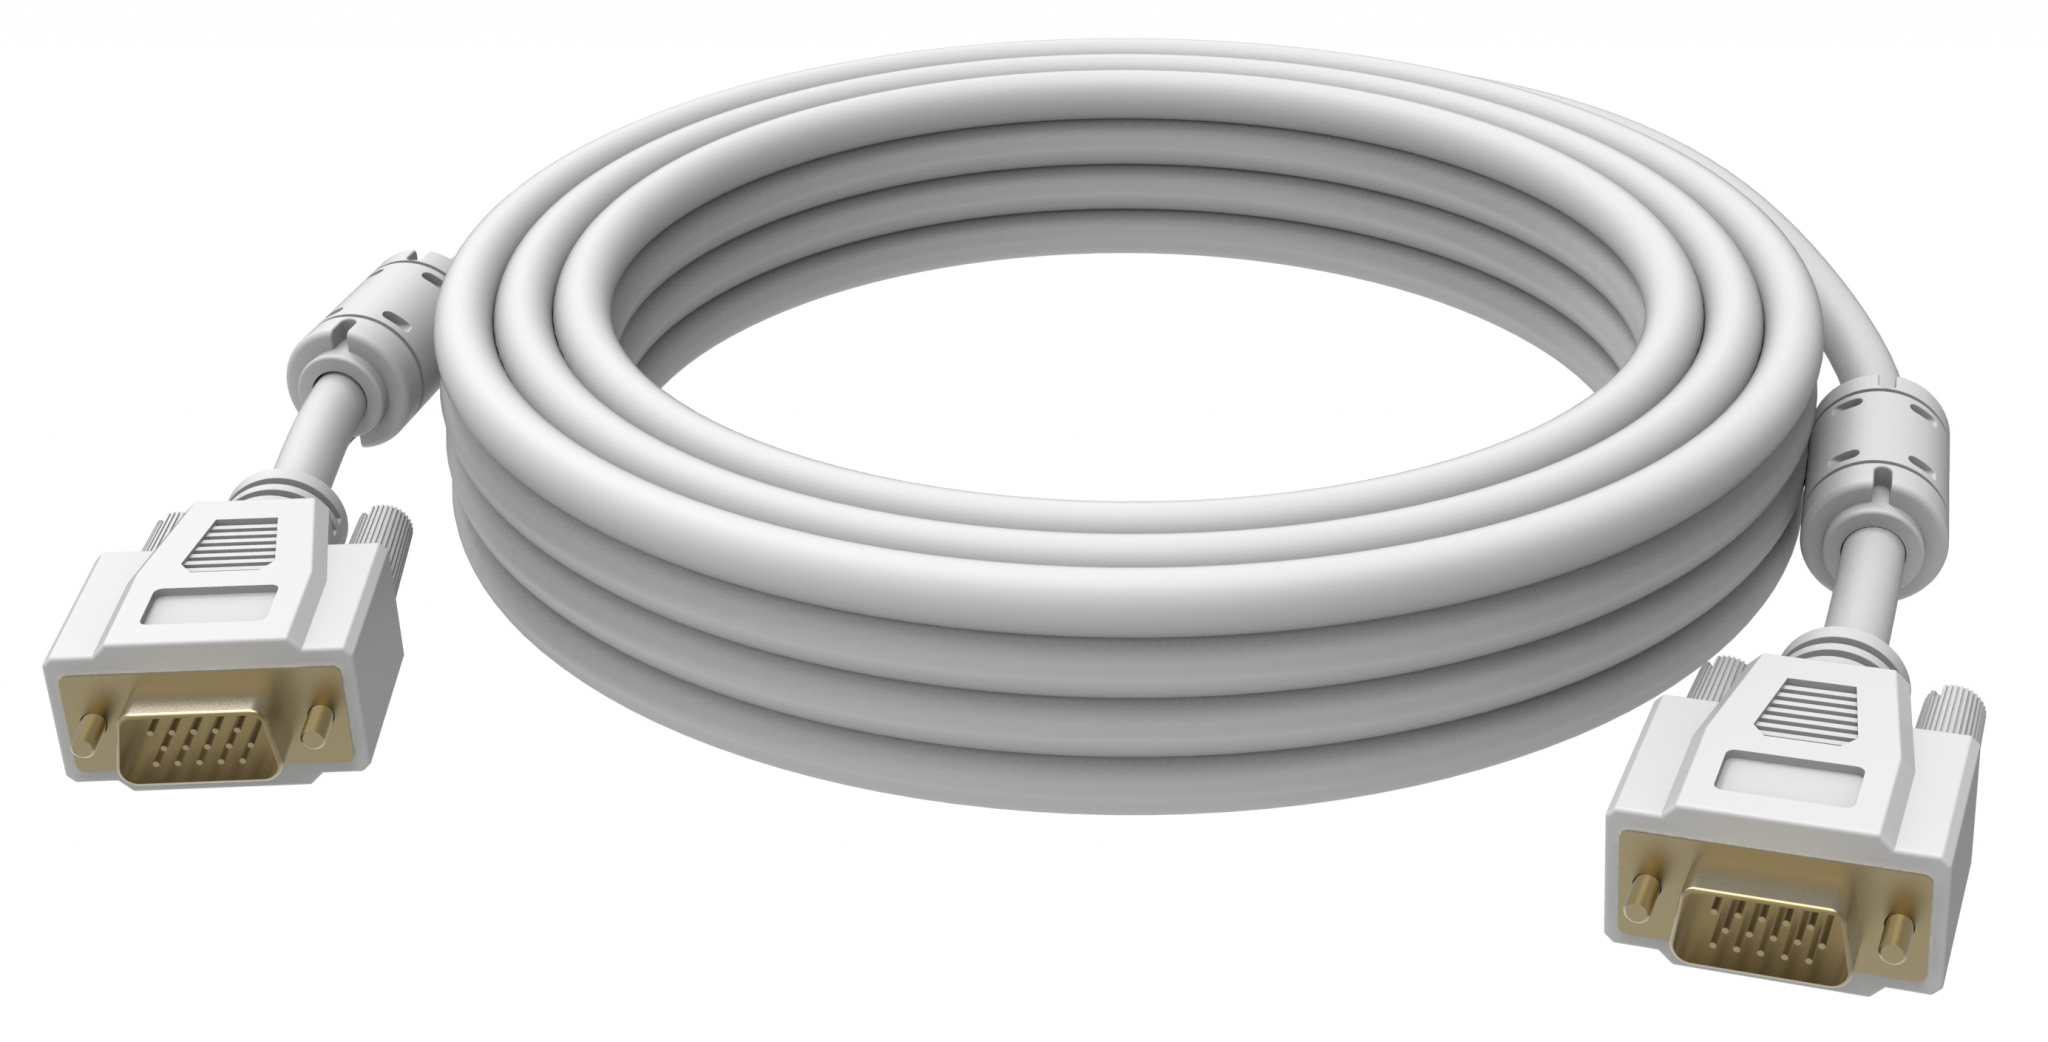 An image showing Cable blanco tipo VGA de 2 m (7 pies)